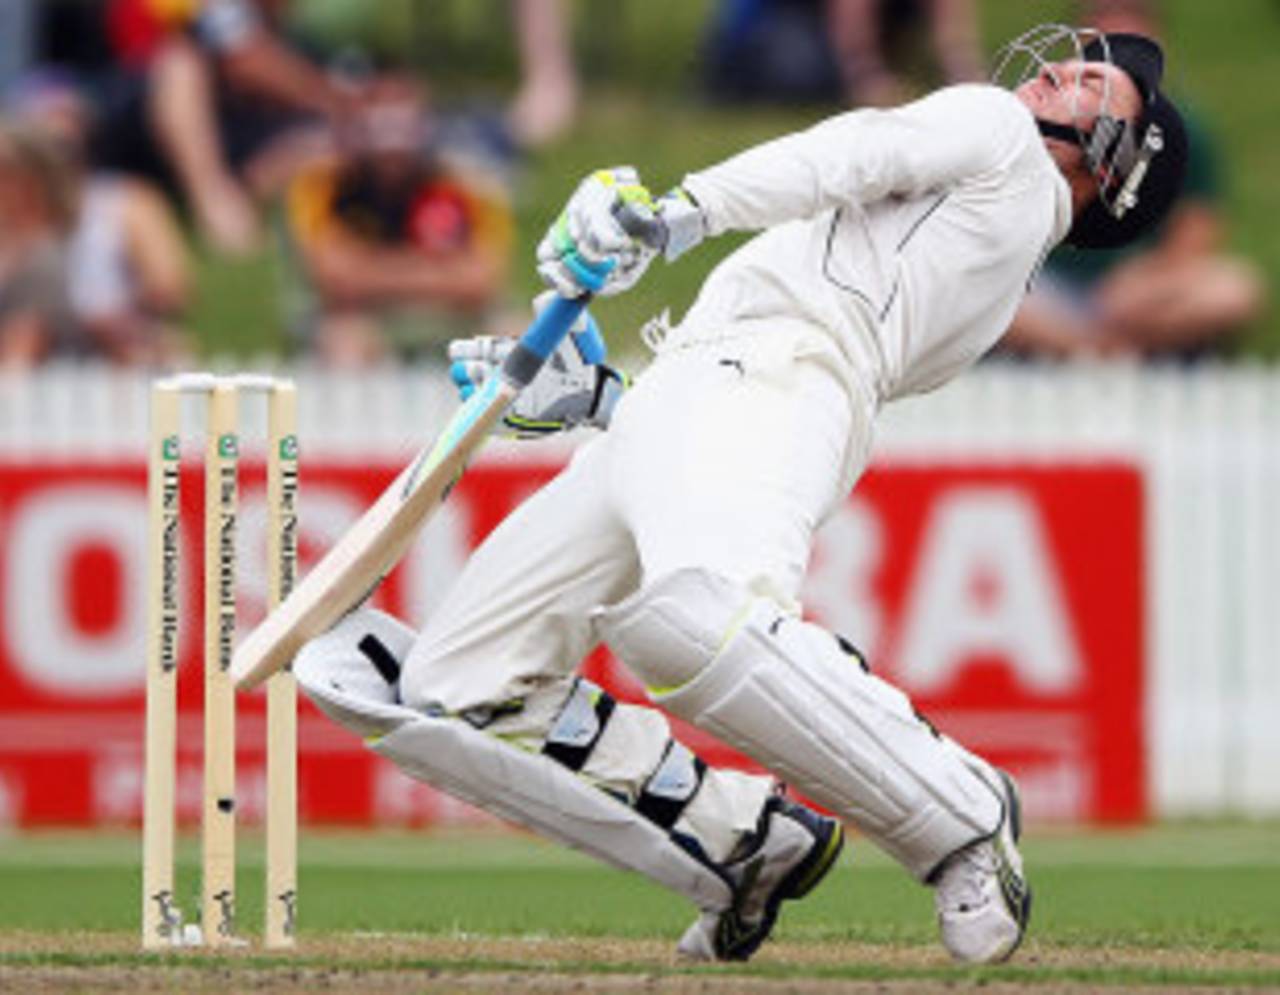 Brendon McCullum had worked hard to make 61 but threw it away with a poor shot&nbsp;&nbsp;&bull;&nbsp;&nbsp;Getty Images